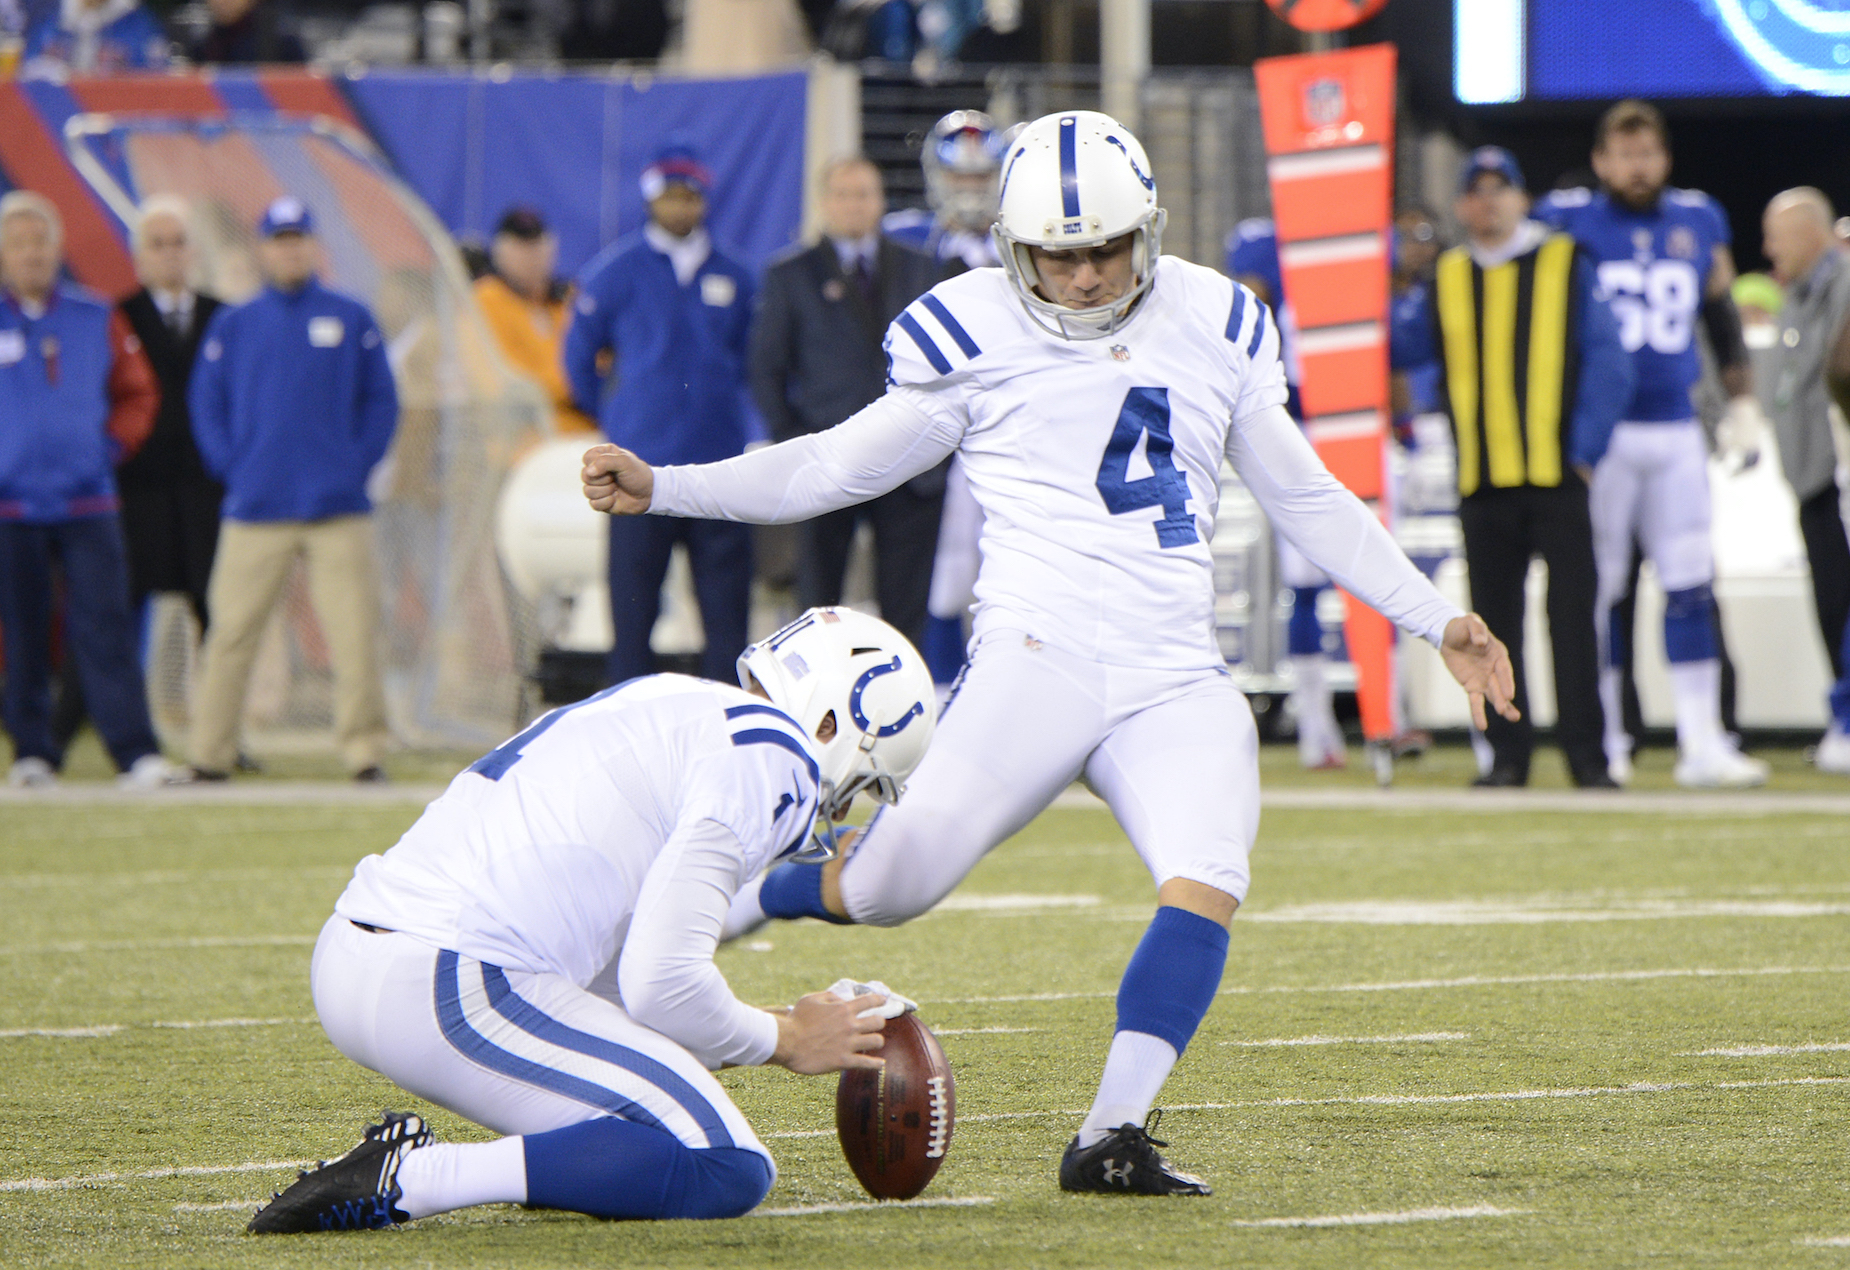 Adam Vinatieri, who built up a respectable net worth in the NFL, kicks another field goal.